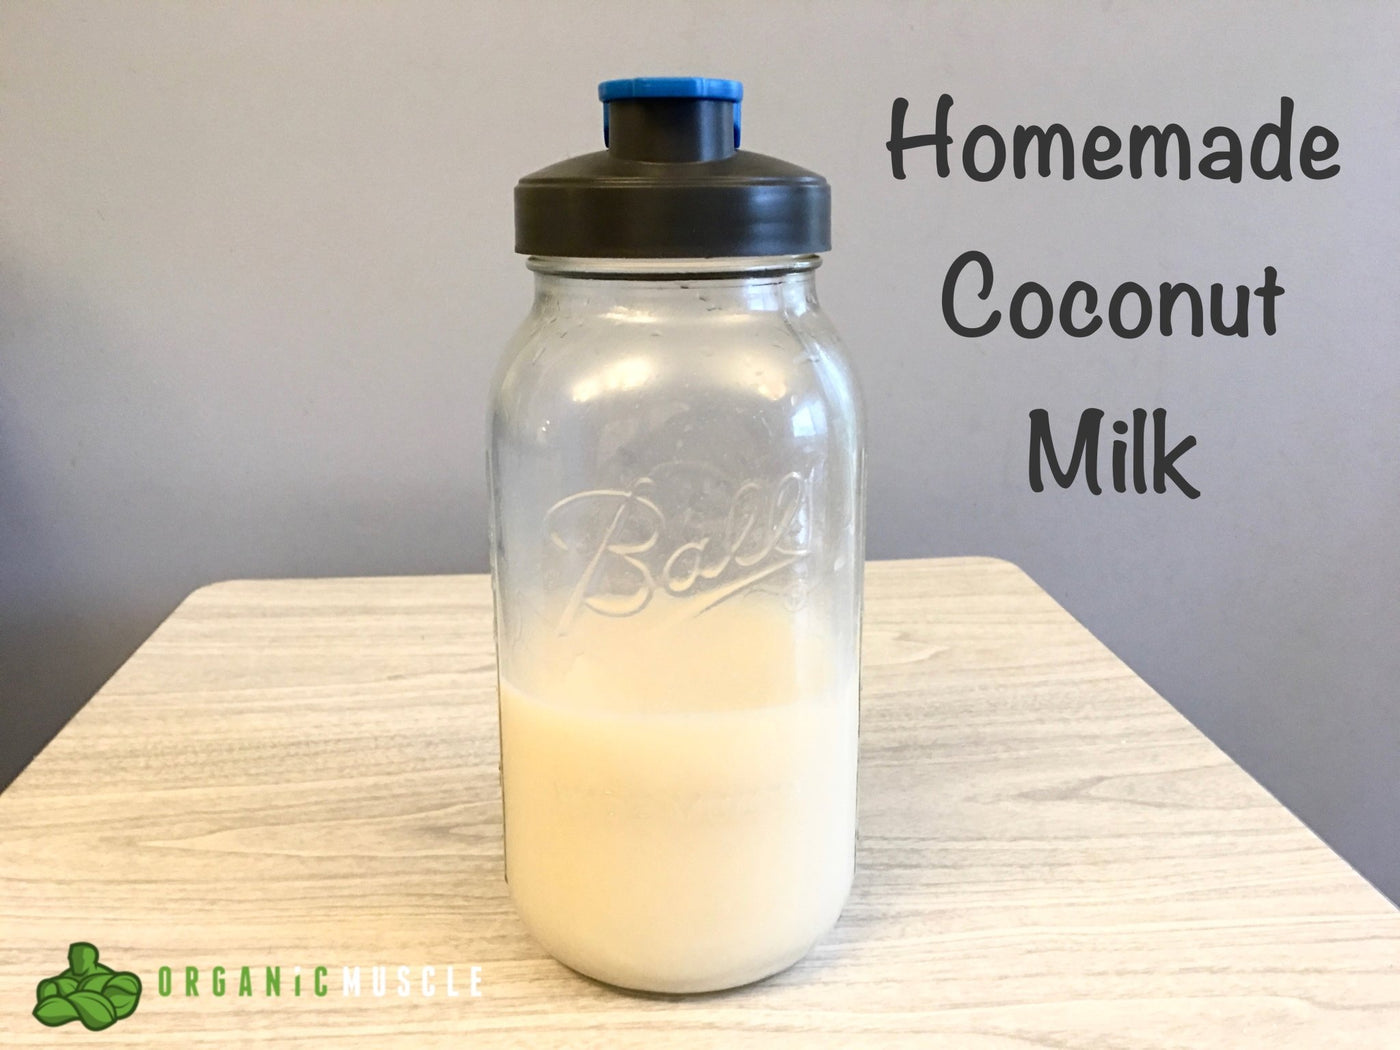 Homemade Coconut Milk - Organic Muscle Fitness Supplements